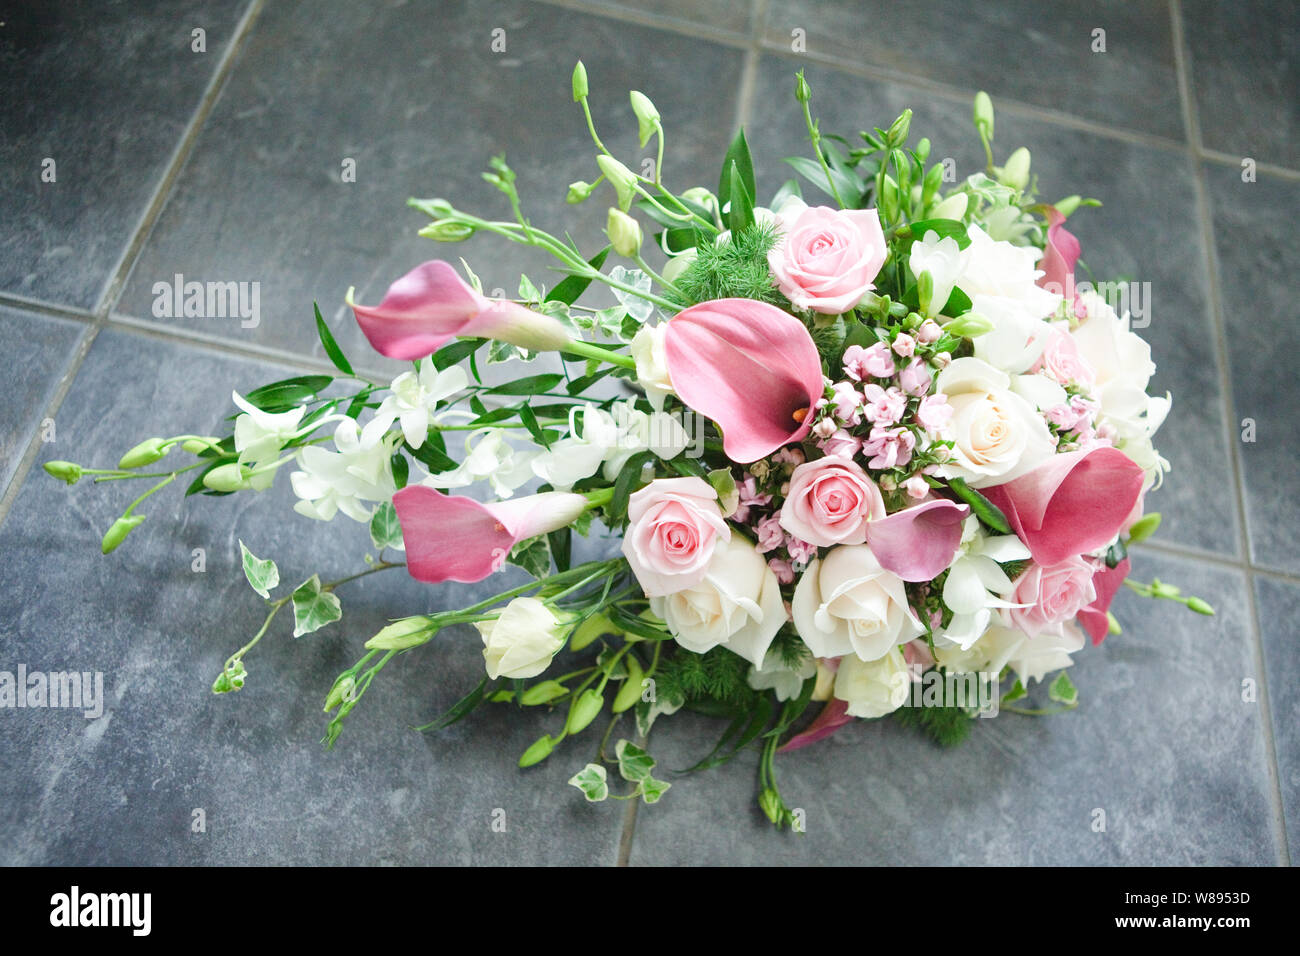 Wedding Flowers - White Rose and Pink Calla Lily Bouquet Stock Photo